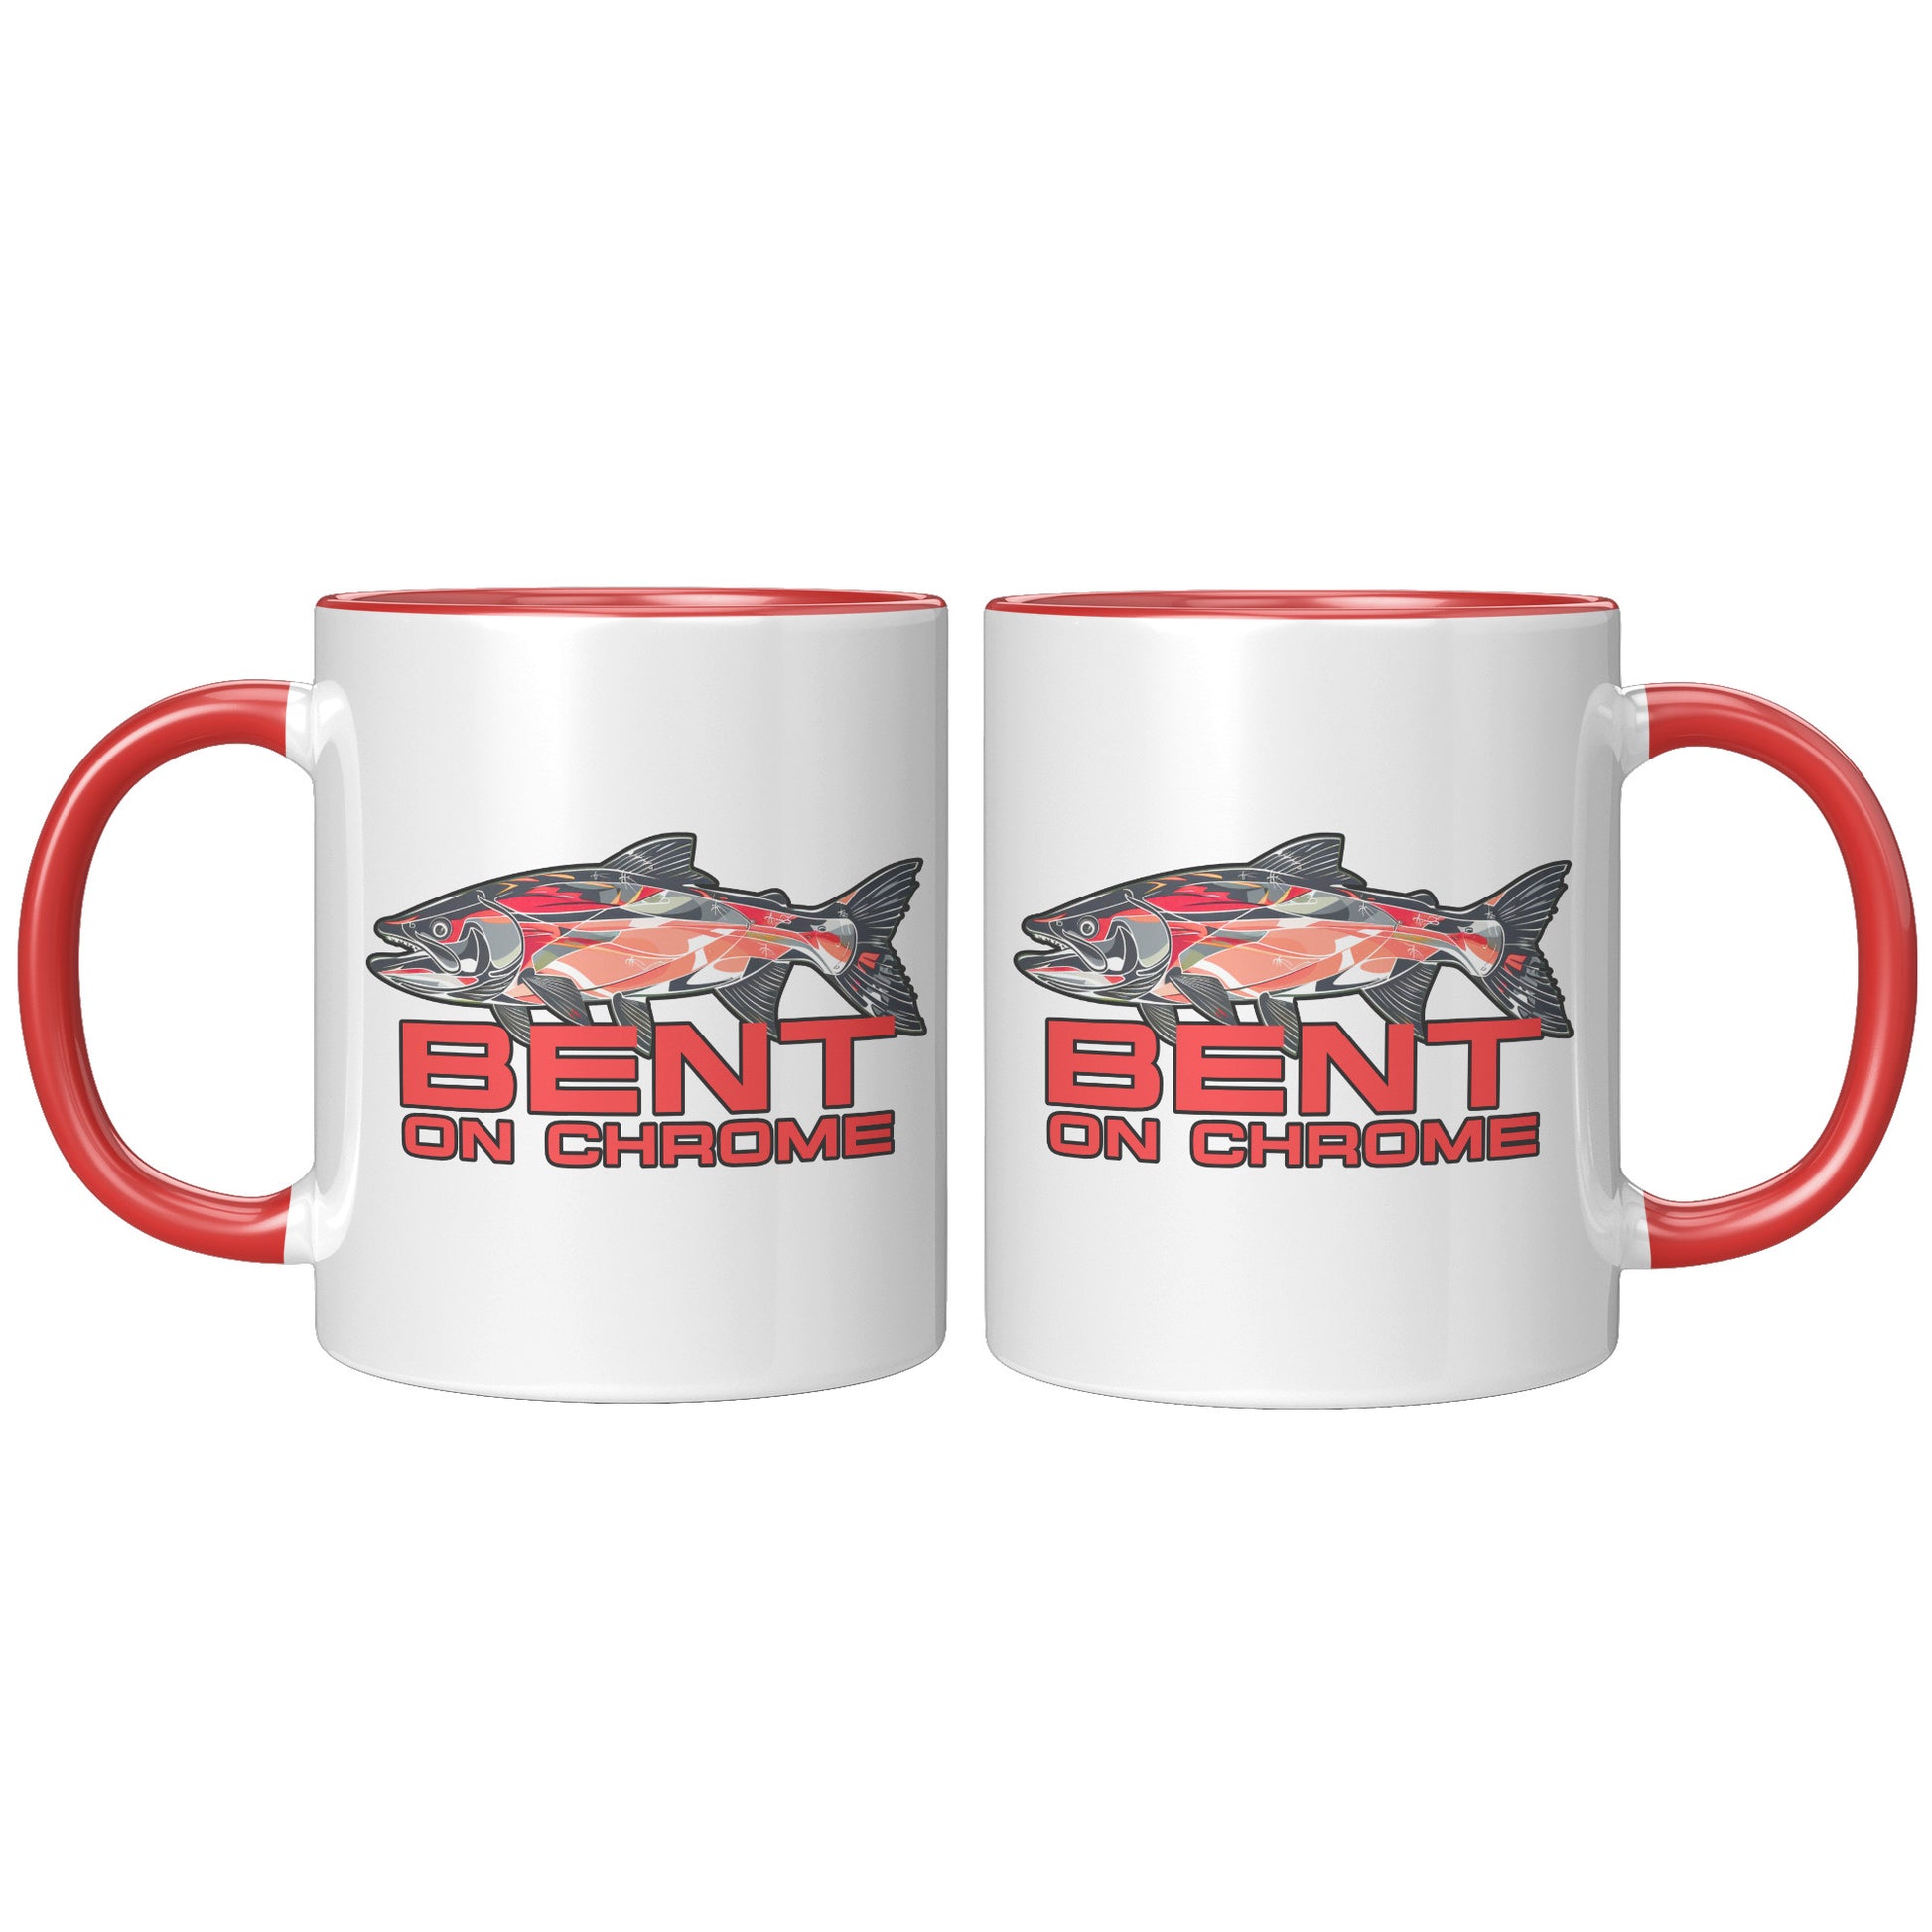 Two white Bent on Chrome - Red Salmon accent mugs with black handles, featuring a graphic of a red fish and the text "bent on chrome" in bold letters. The mugs are identical, have a high gloss finish.